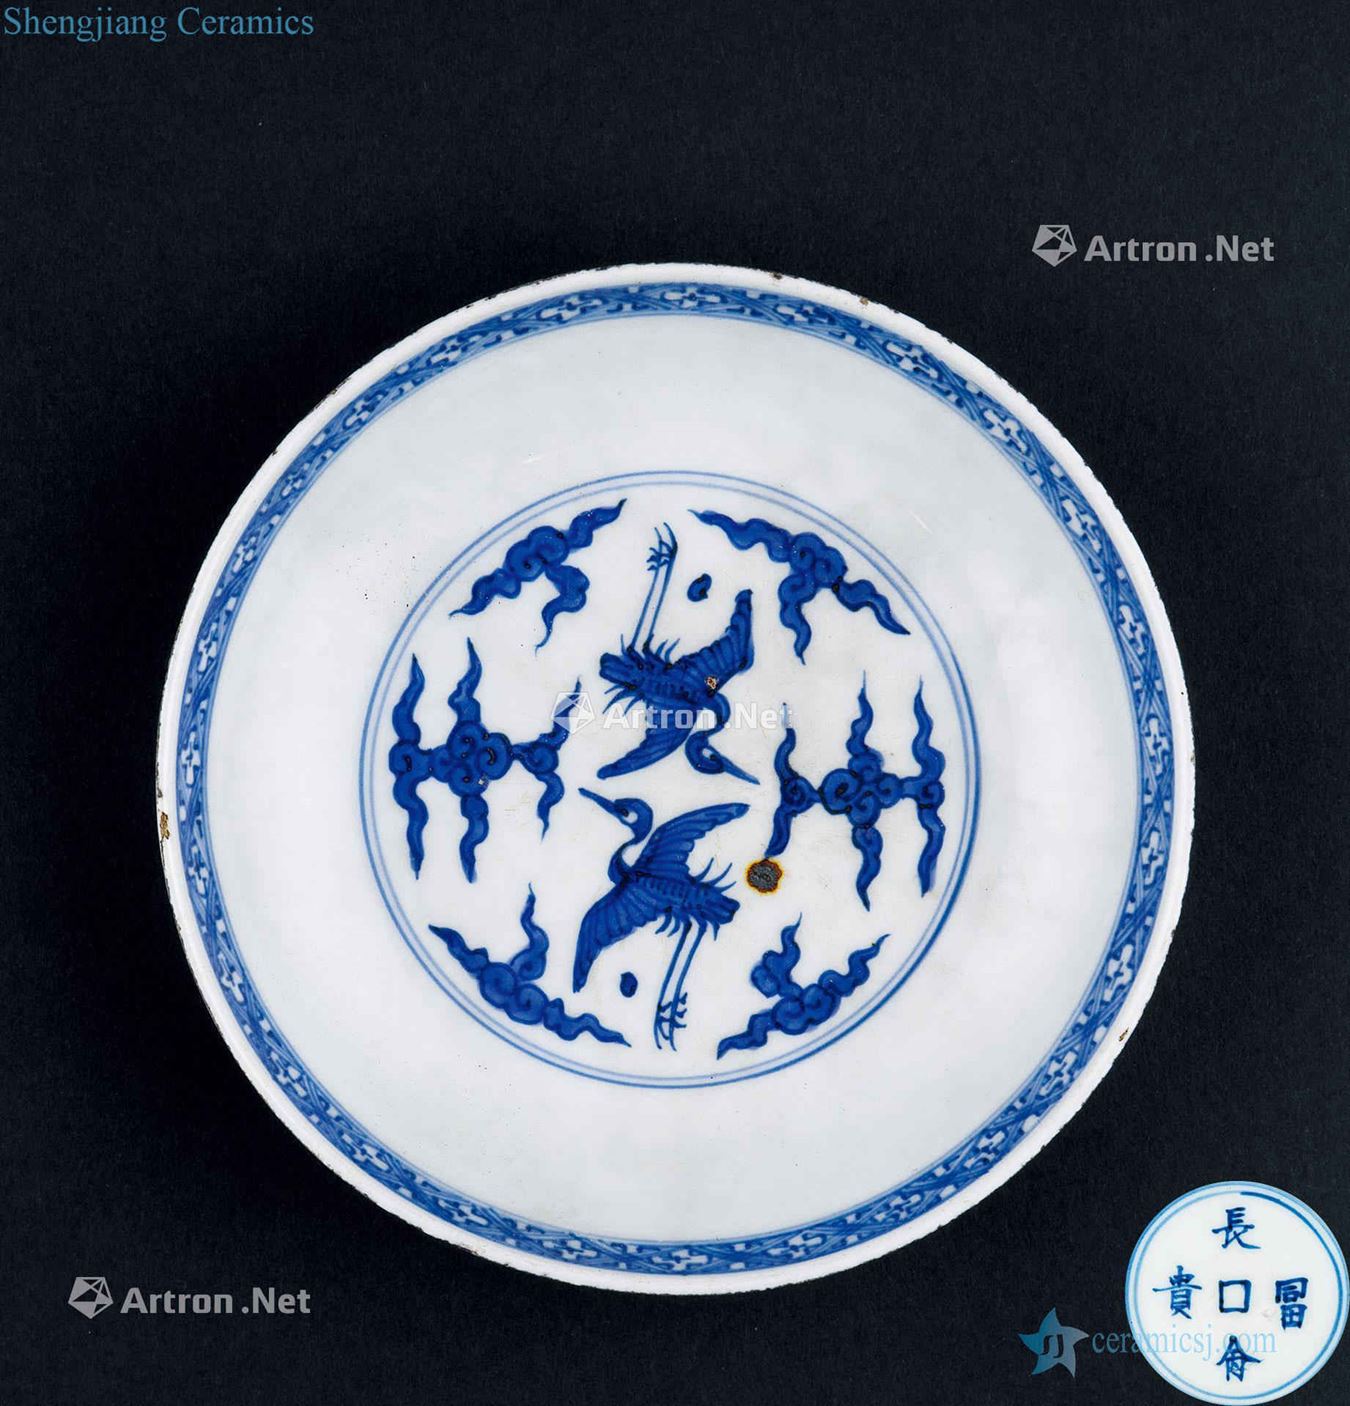 In the Ming dynasty (1368-1644) blue and white James t. c. na was published tray